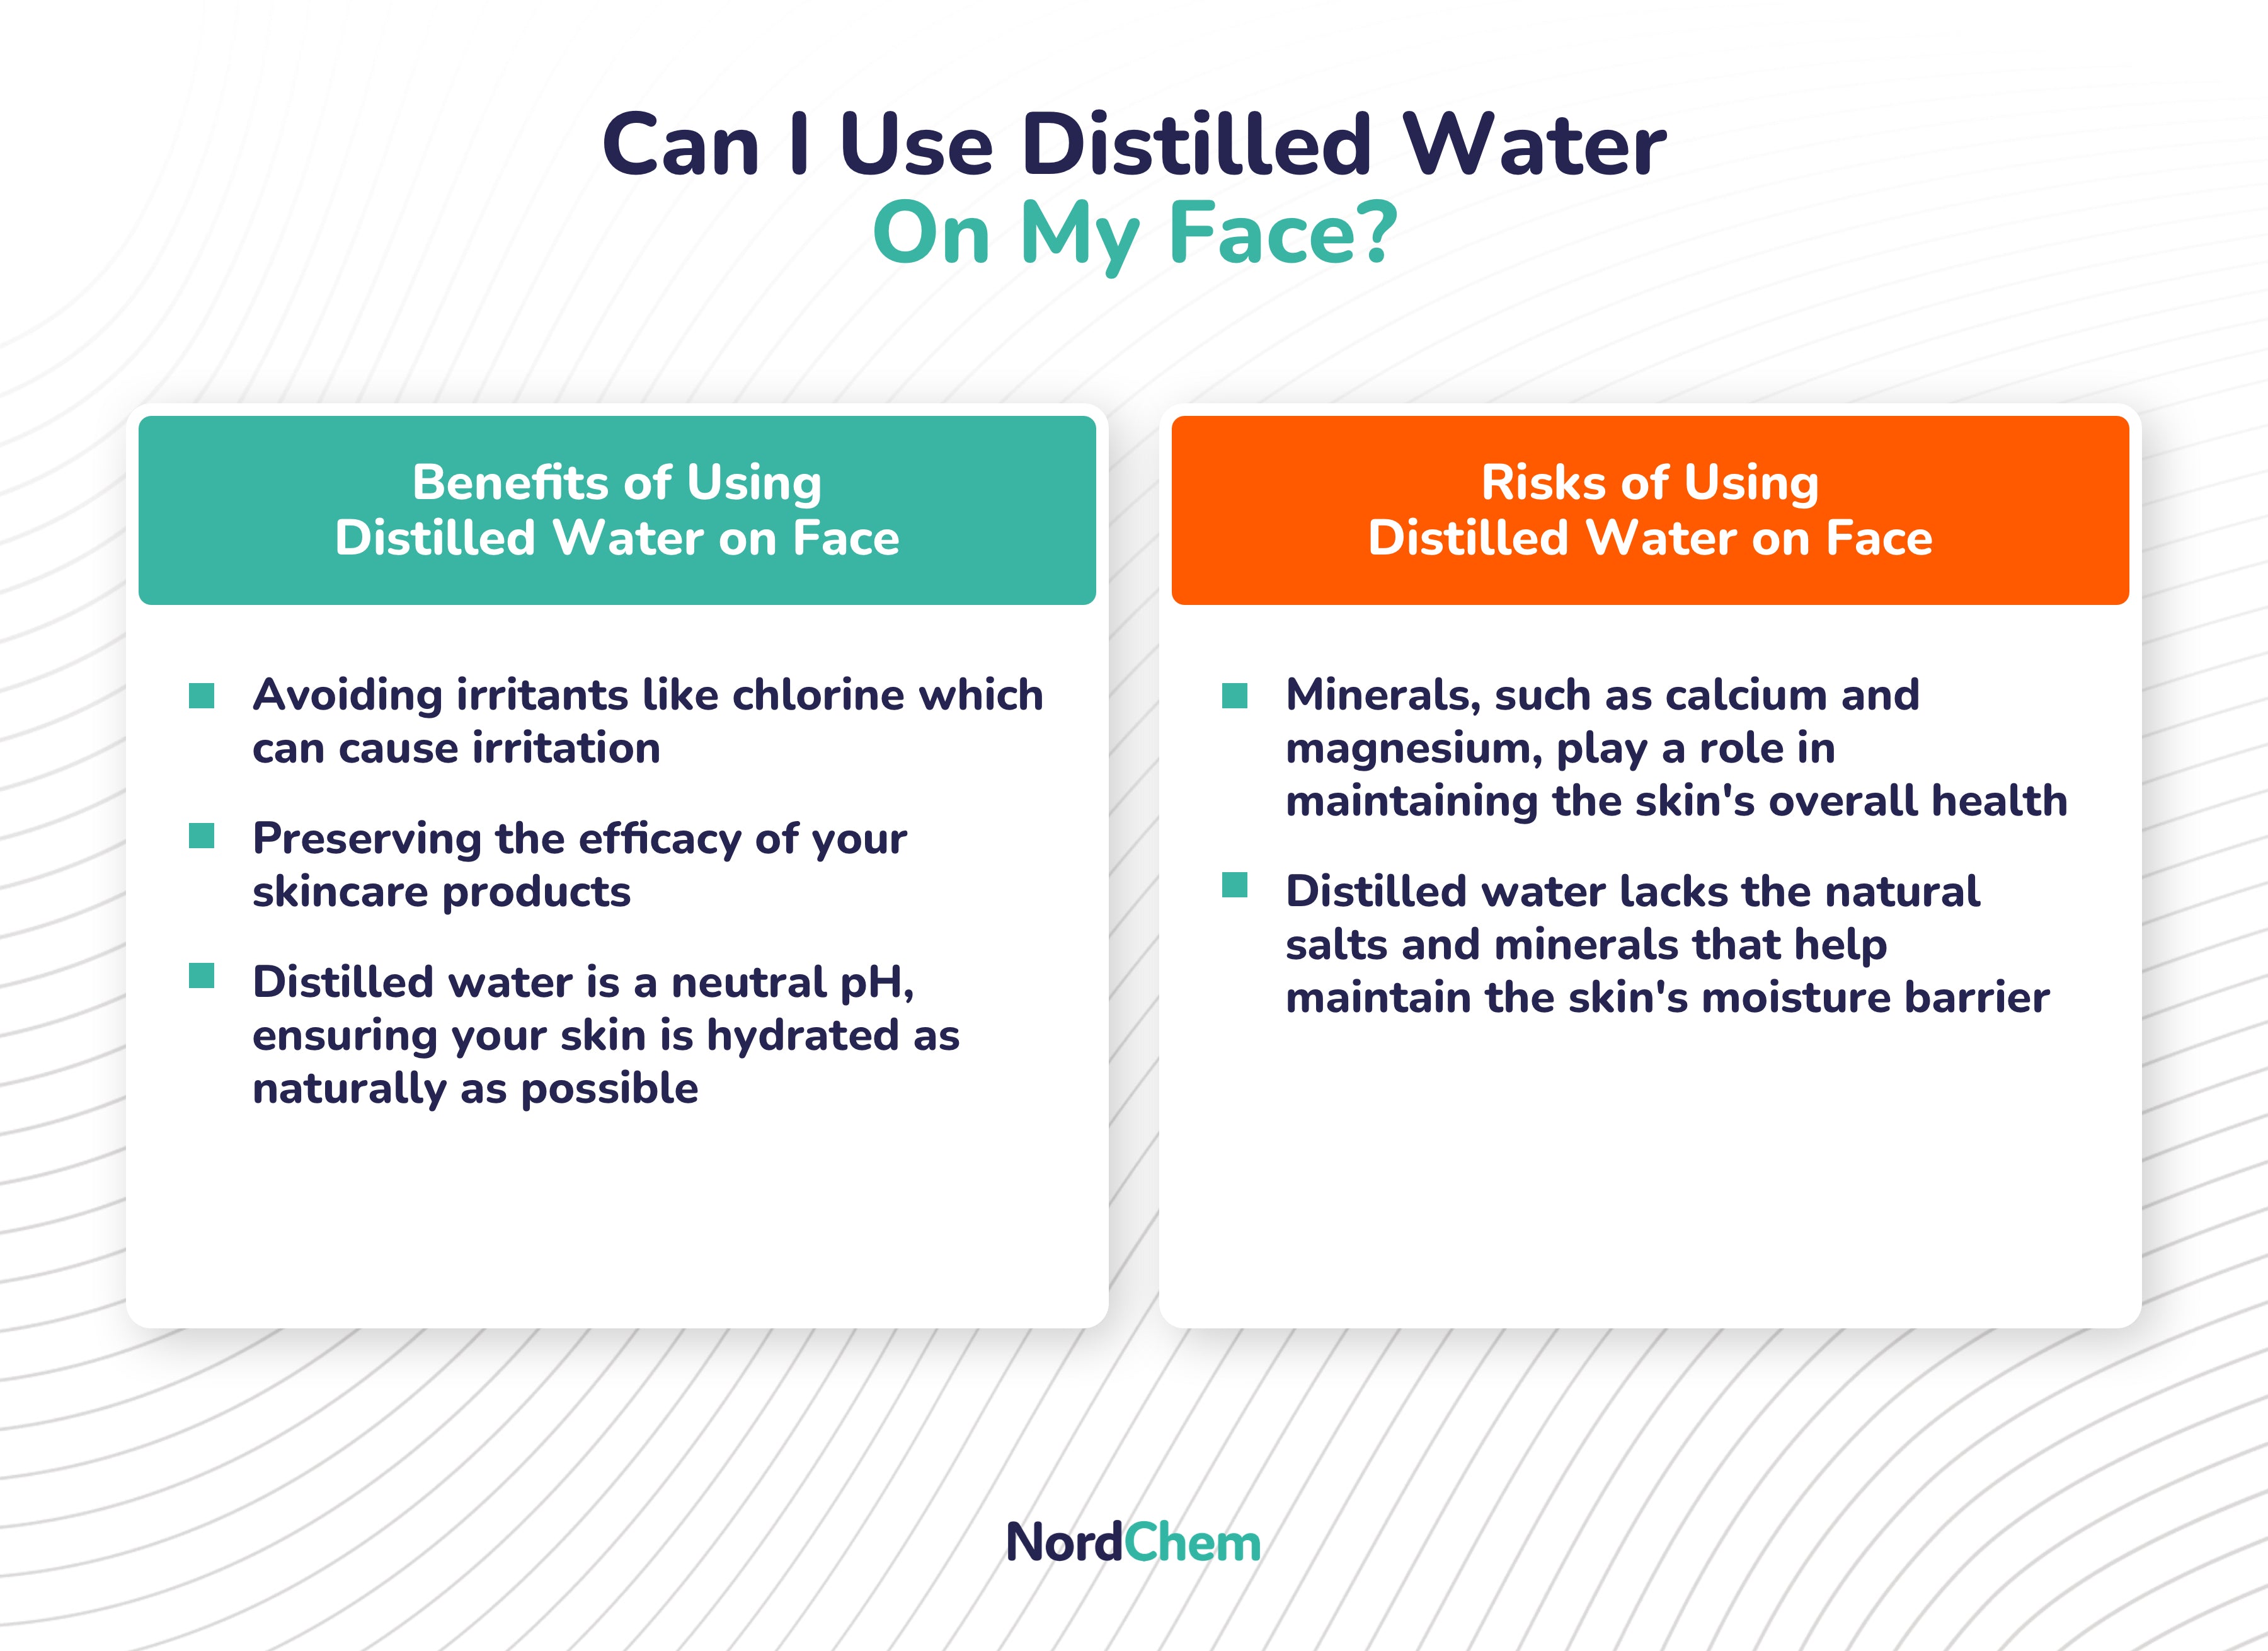 list of the benefits and risks of using distilled water on your face